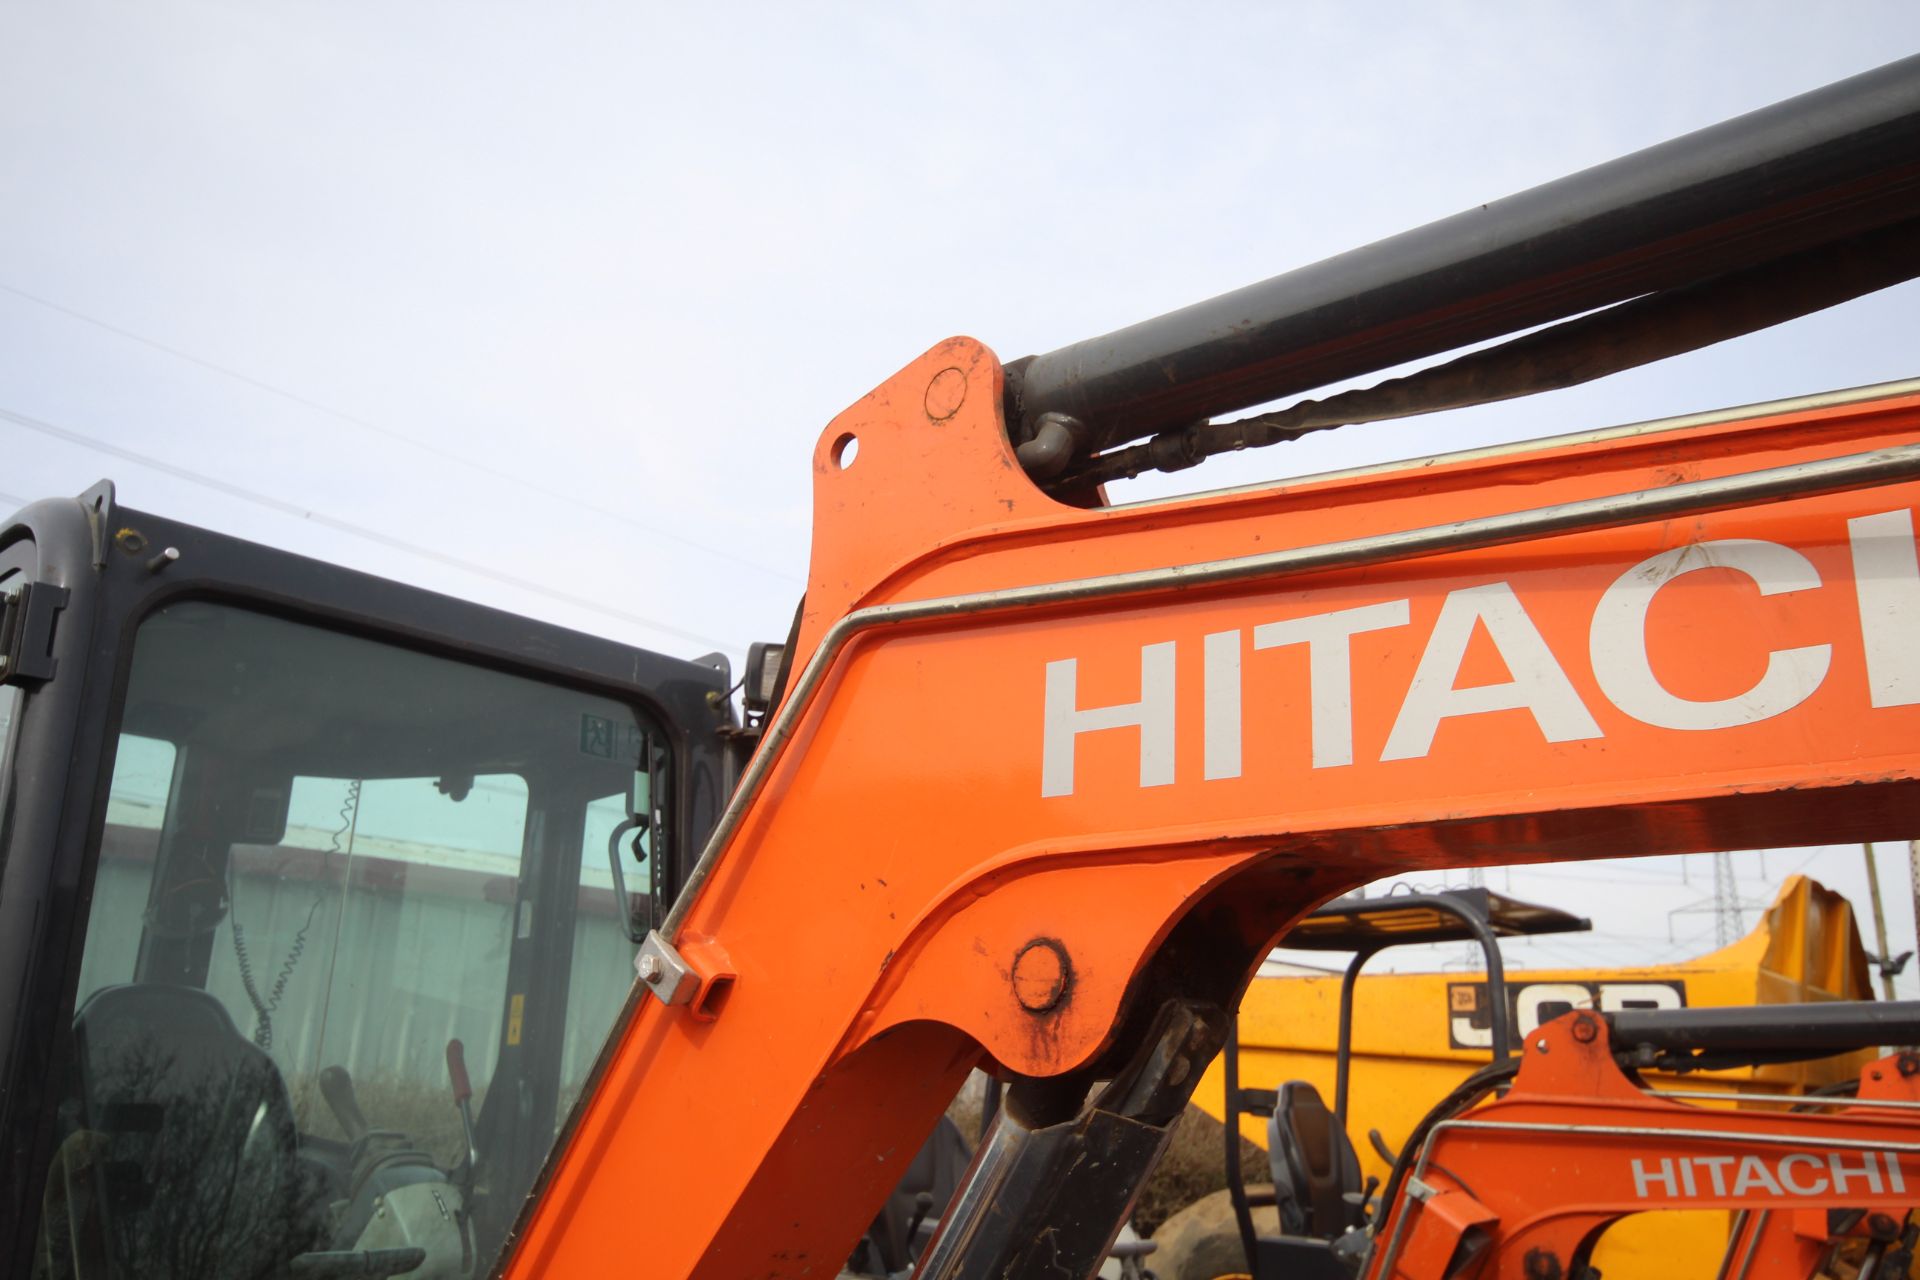 Hitachi Z-Axis 26U-5A CR 2.6T rubber track excavator. 2017. 2,722 hours. Serial number HCM - Image 11 of 58